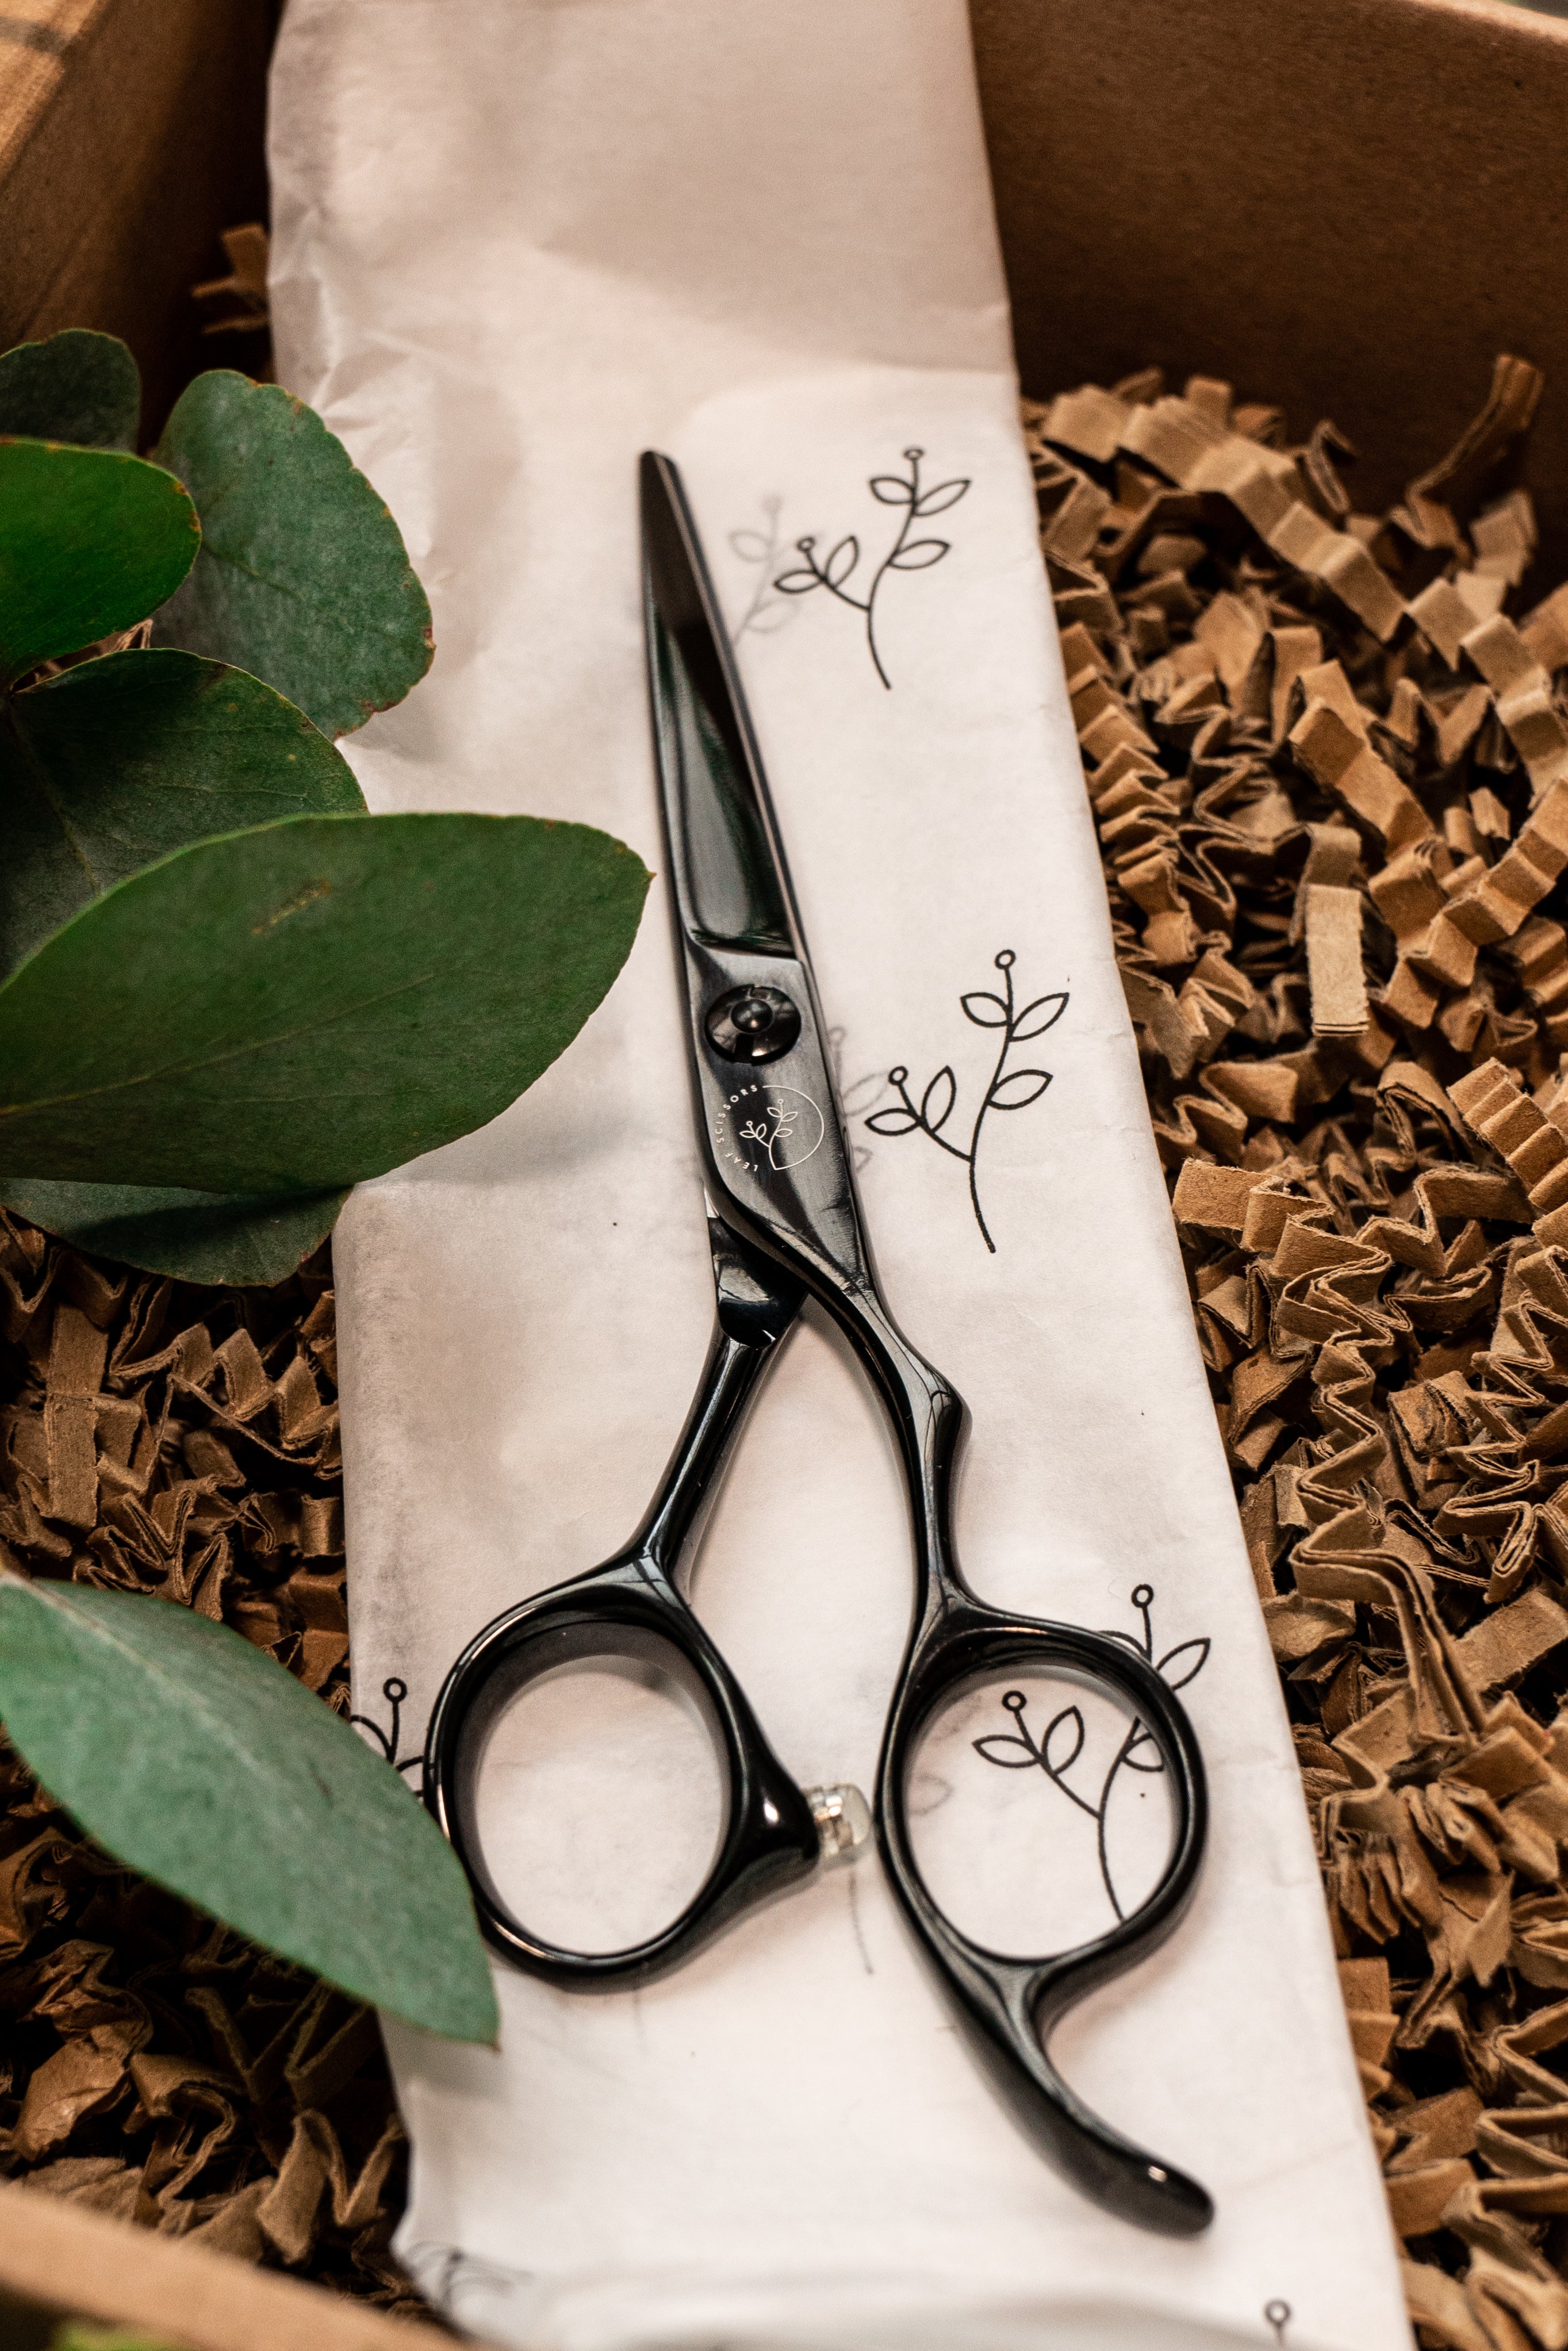 How To Sharpen Hair Cutting Scissors At Home - 4 Easy Tricks